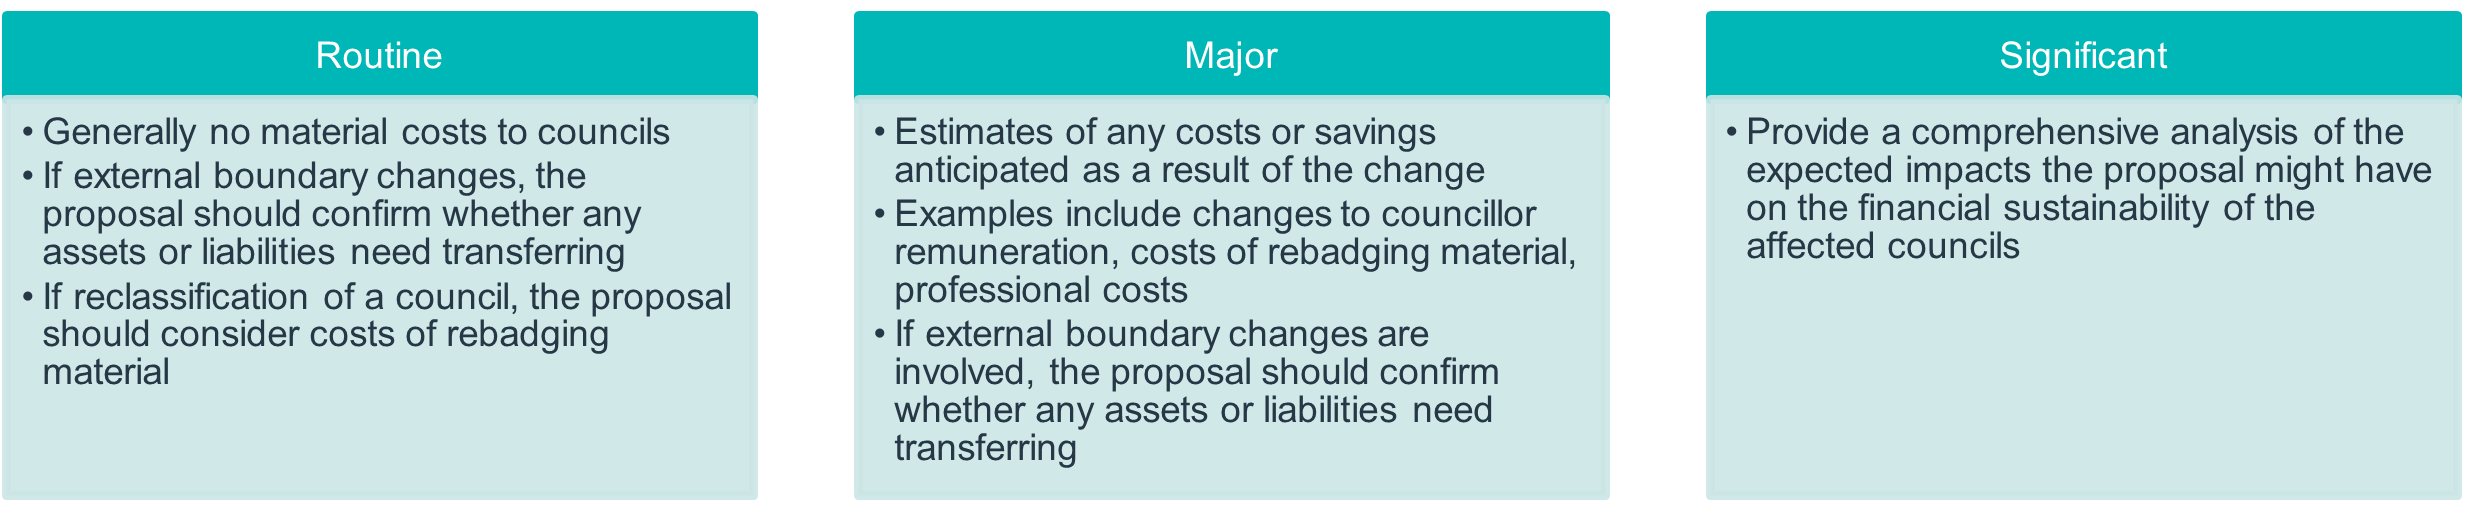 what the changes will cost councils